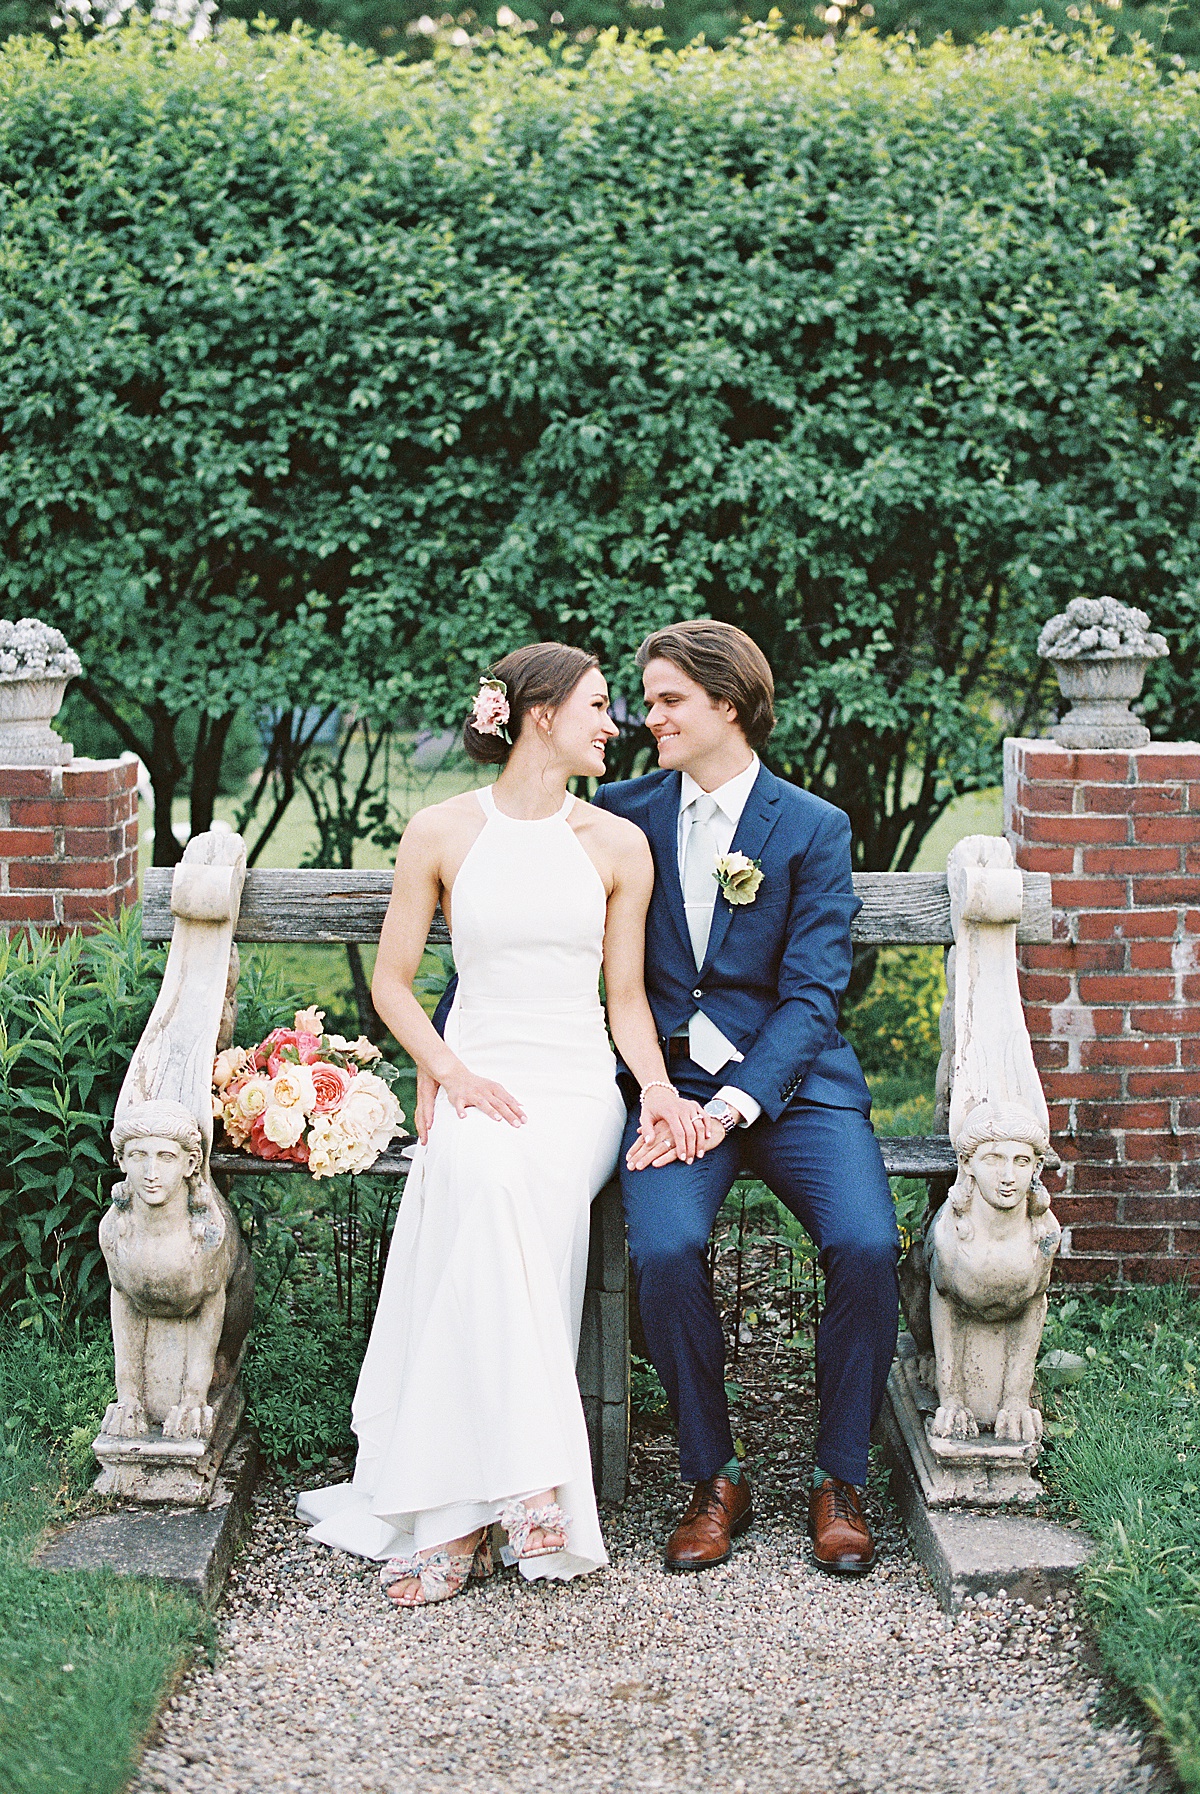 preppy bride and groom in blue suit pose on garden bench before ceremony shot by Massachusetts wedding photographer